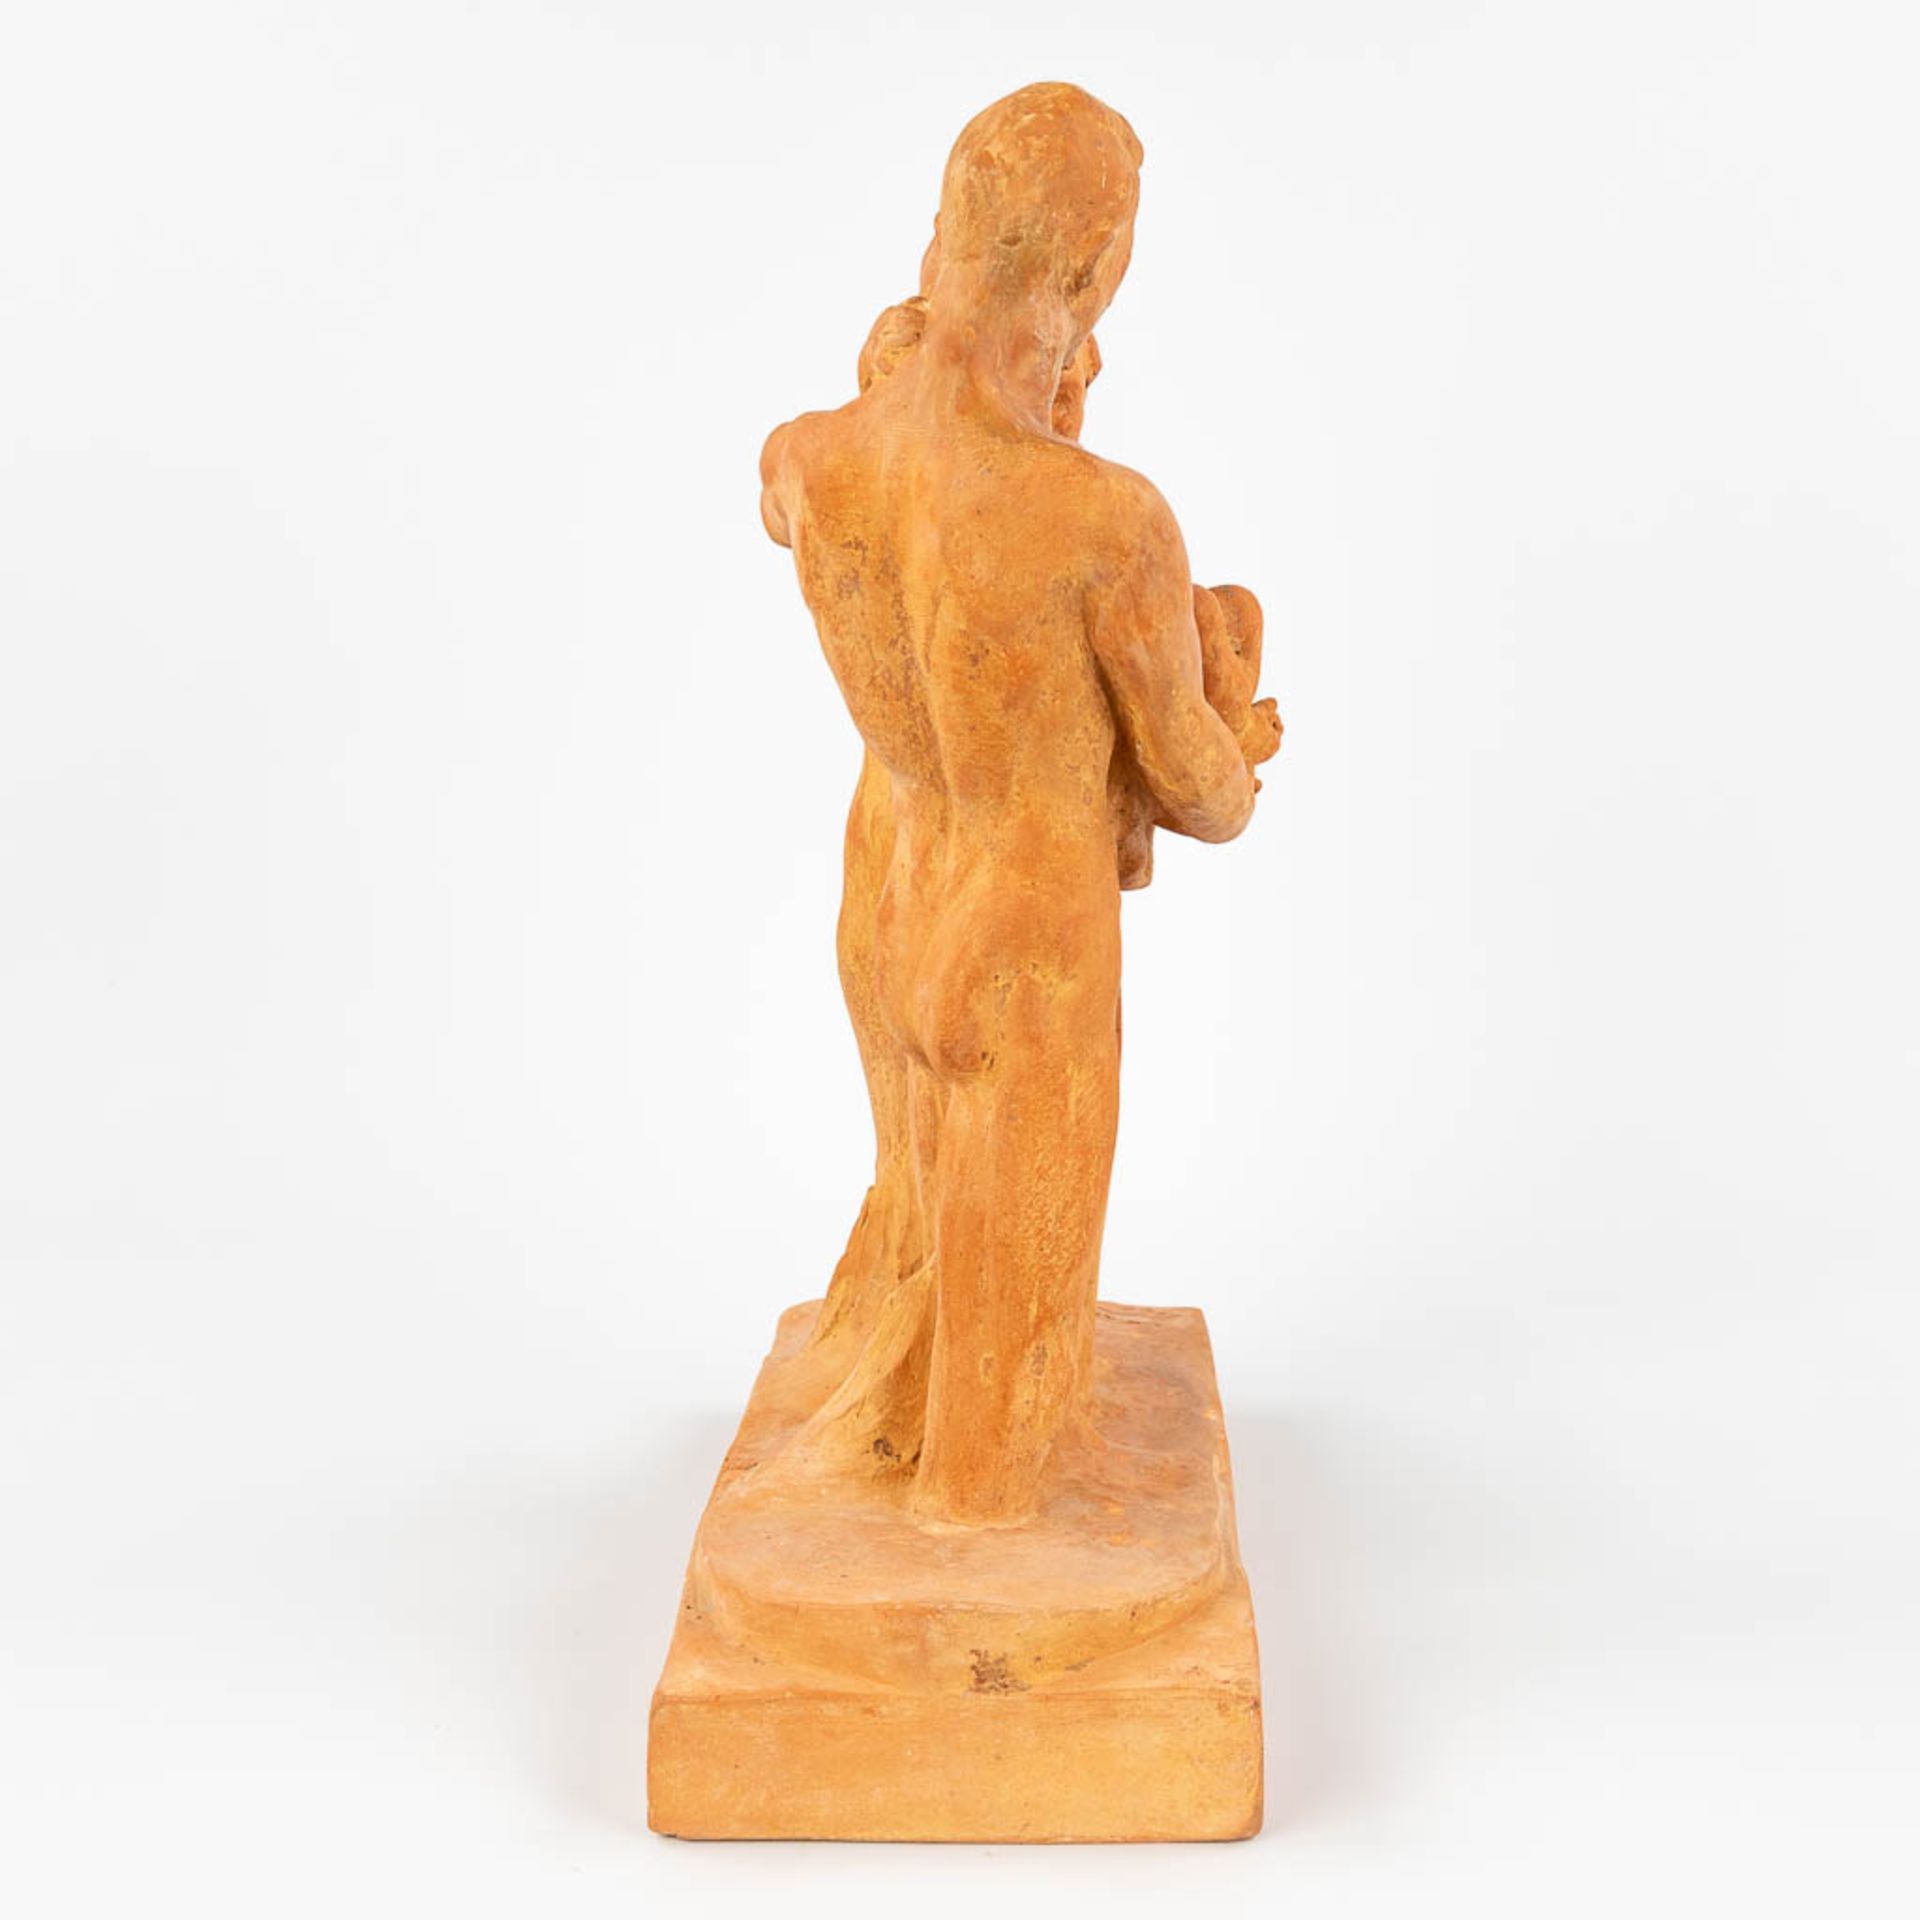 Achille LEYS (1873-1953) 'Family' a statue made of terracotta.Ê1946. (16 x 34 x 44cm) - Image 3 of 11